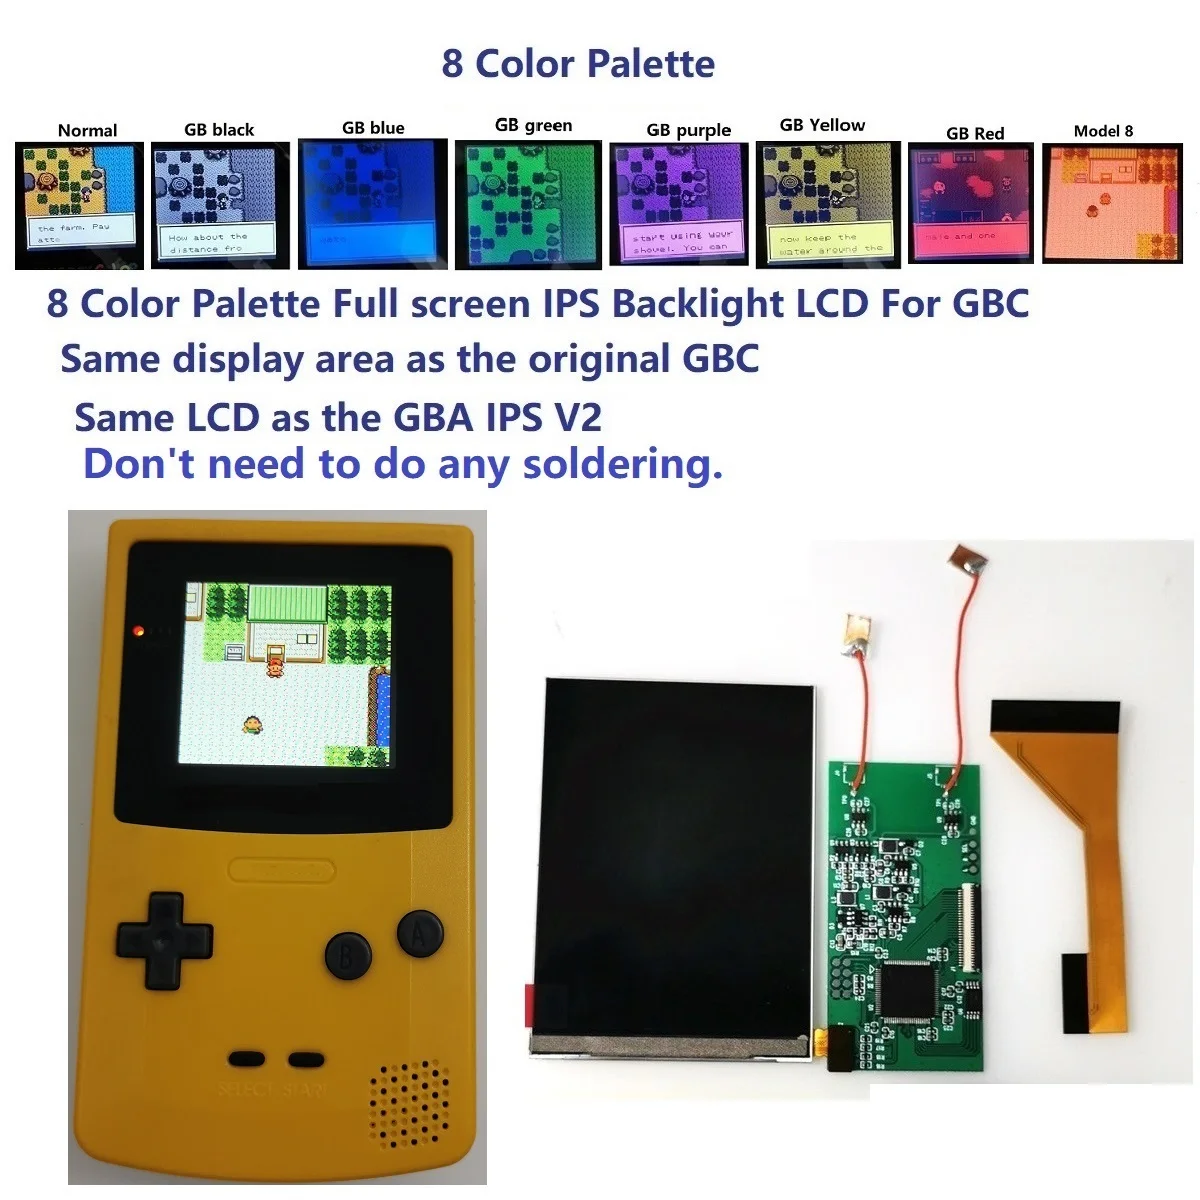 8 Colorful Palette Full Size ips Backlight Backlit LCD Kit For Gameboy Color For GBC Console